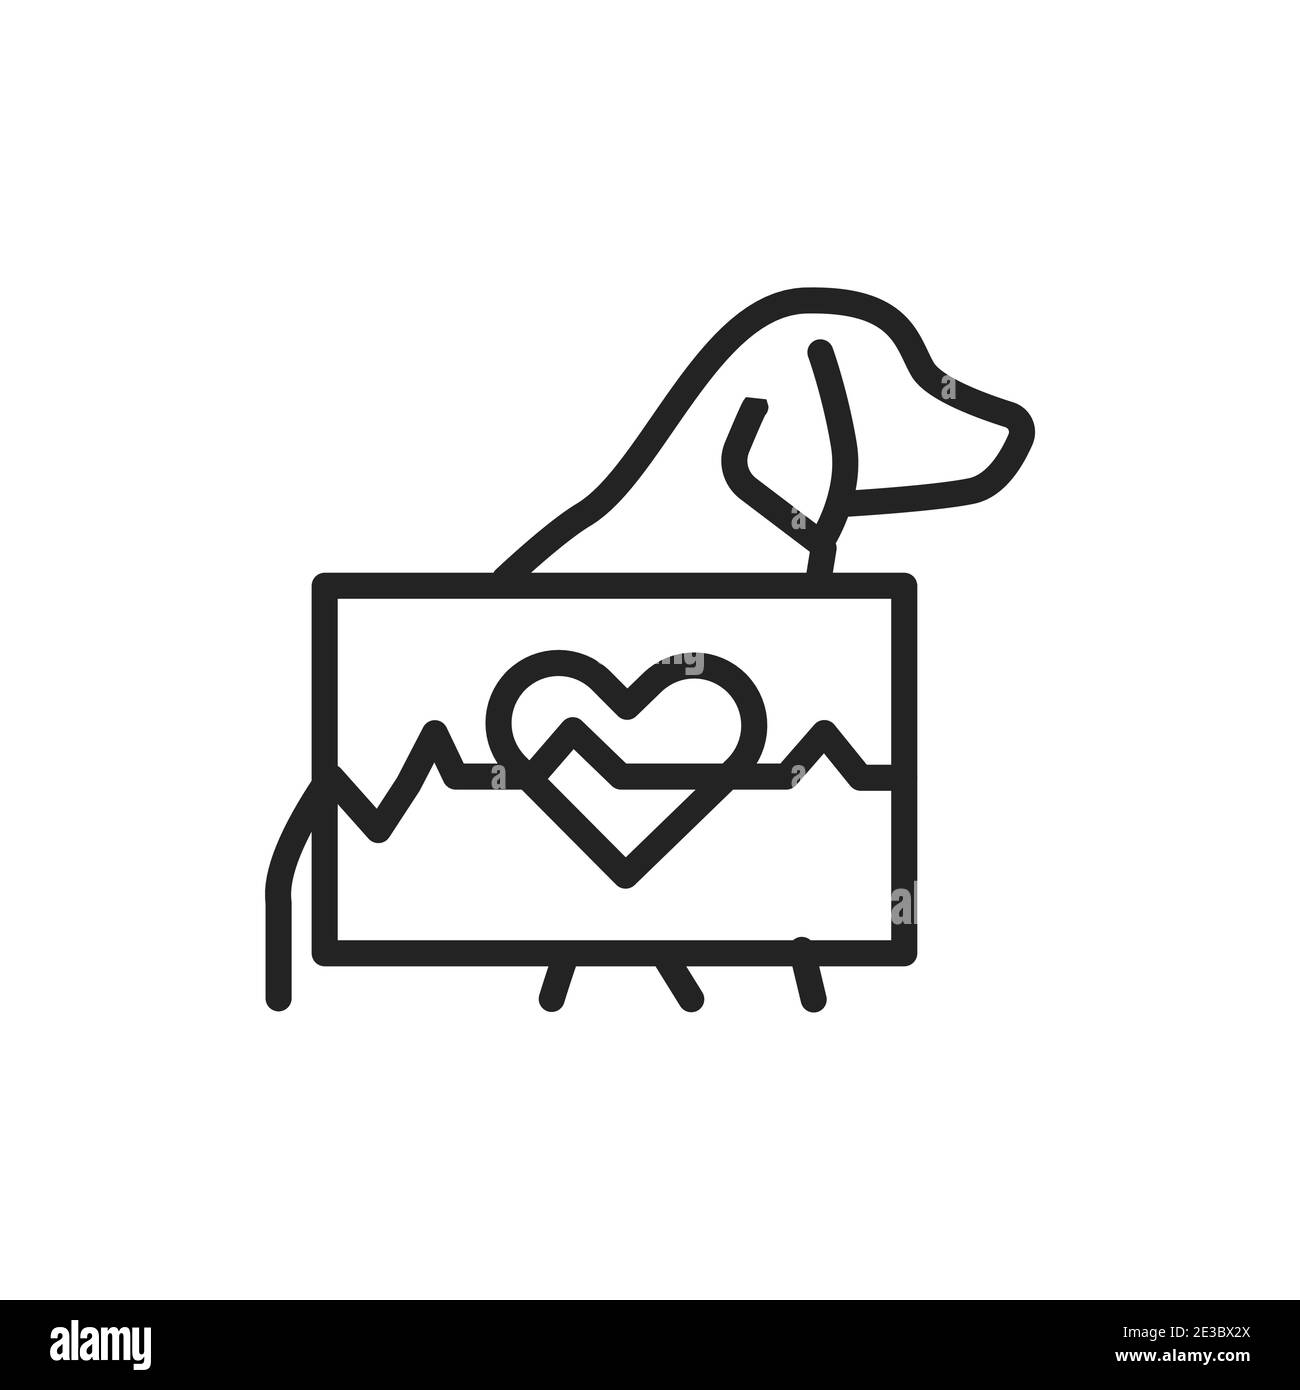 Animal cardiology black line icon. Isolated vector element. Outline pictogram for web page, mobile app, promo. Stock Vector